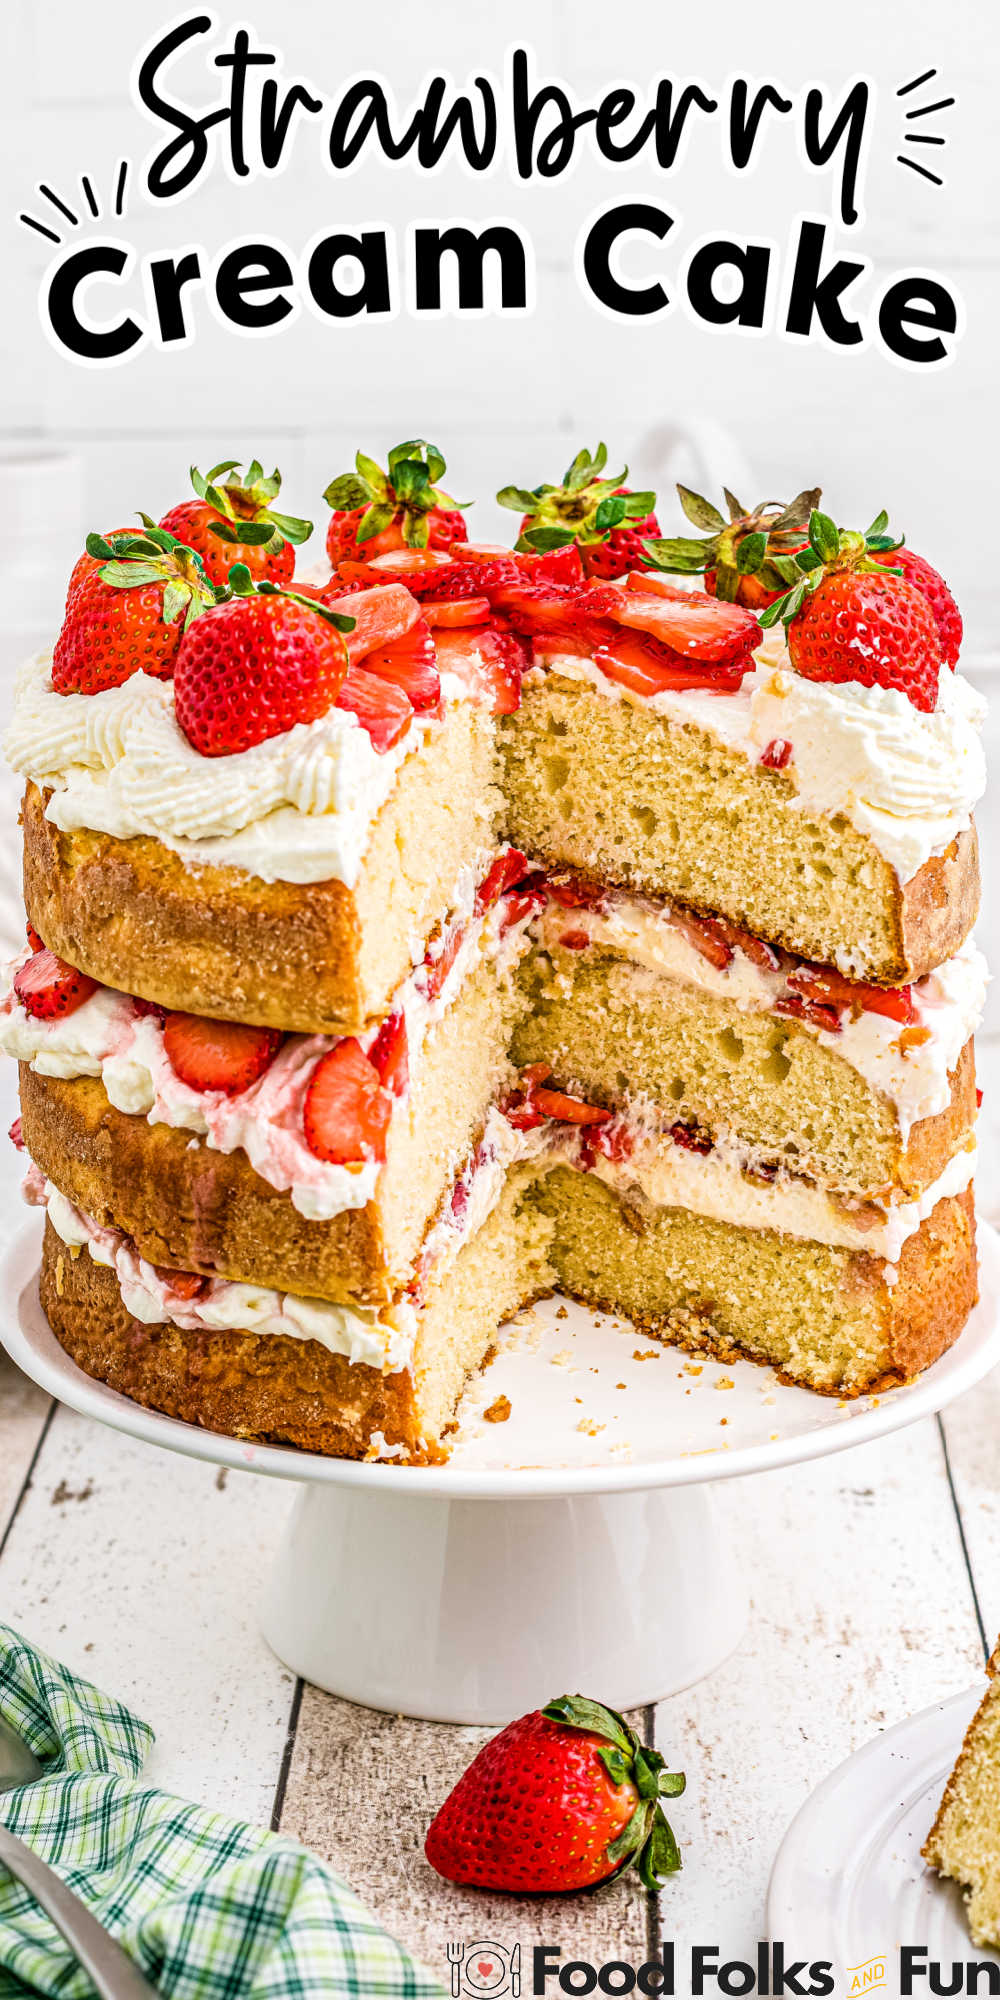 This Strawberry Cream Cake recipe is an impressive layer cake for summer parties, BBQs, potlucks, or other get-togethers. This dessert is a show-stopper! via @foodfolksandfun